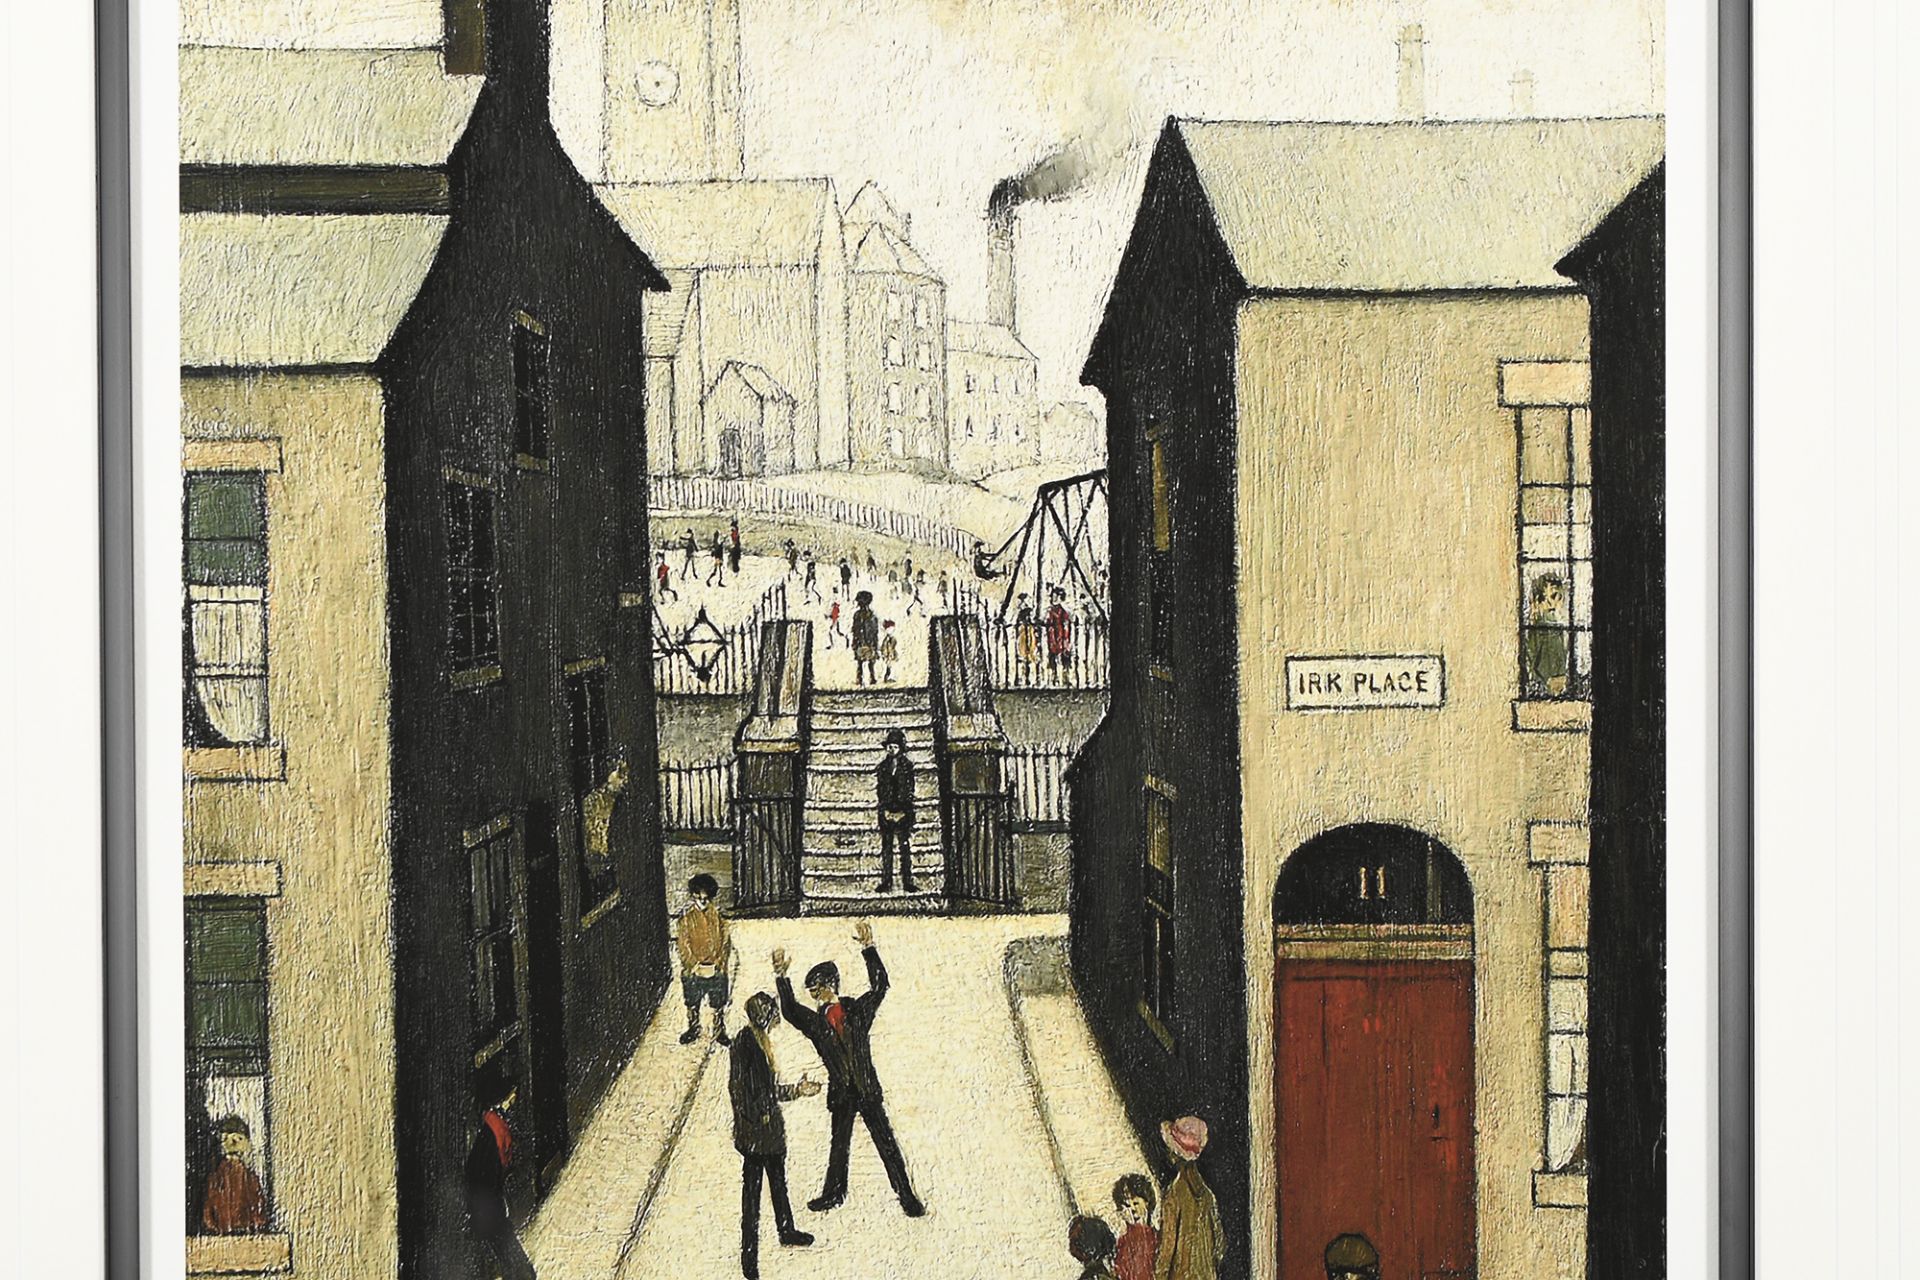 Limited Edition L.S. Lowry "The Steps, Irk Place 1928" - Image 4 of 11